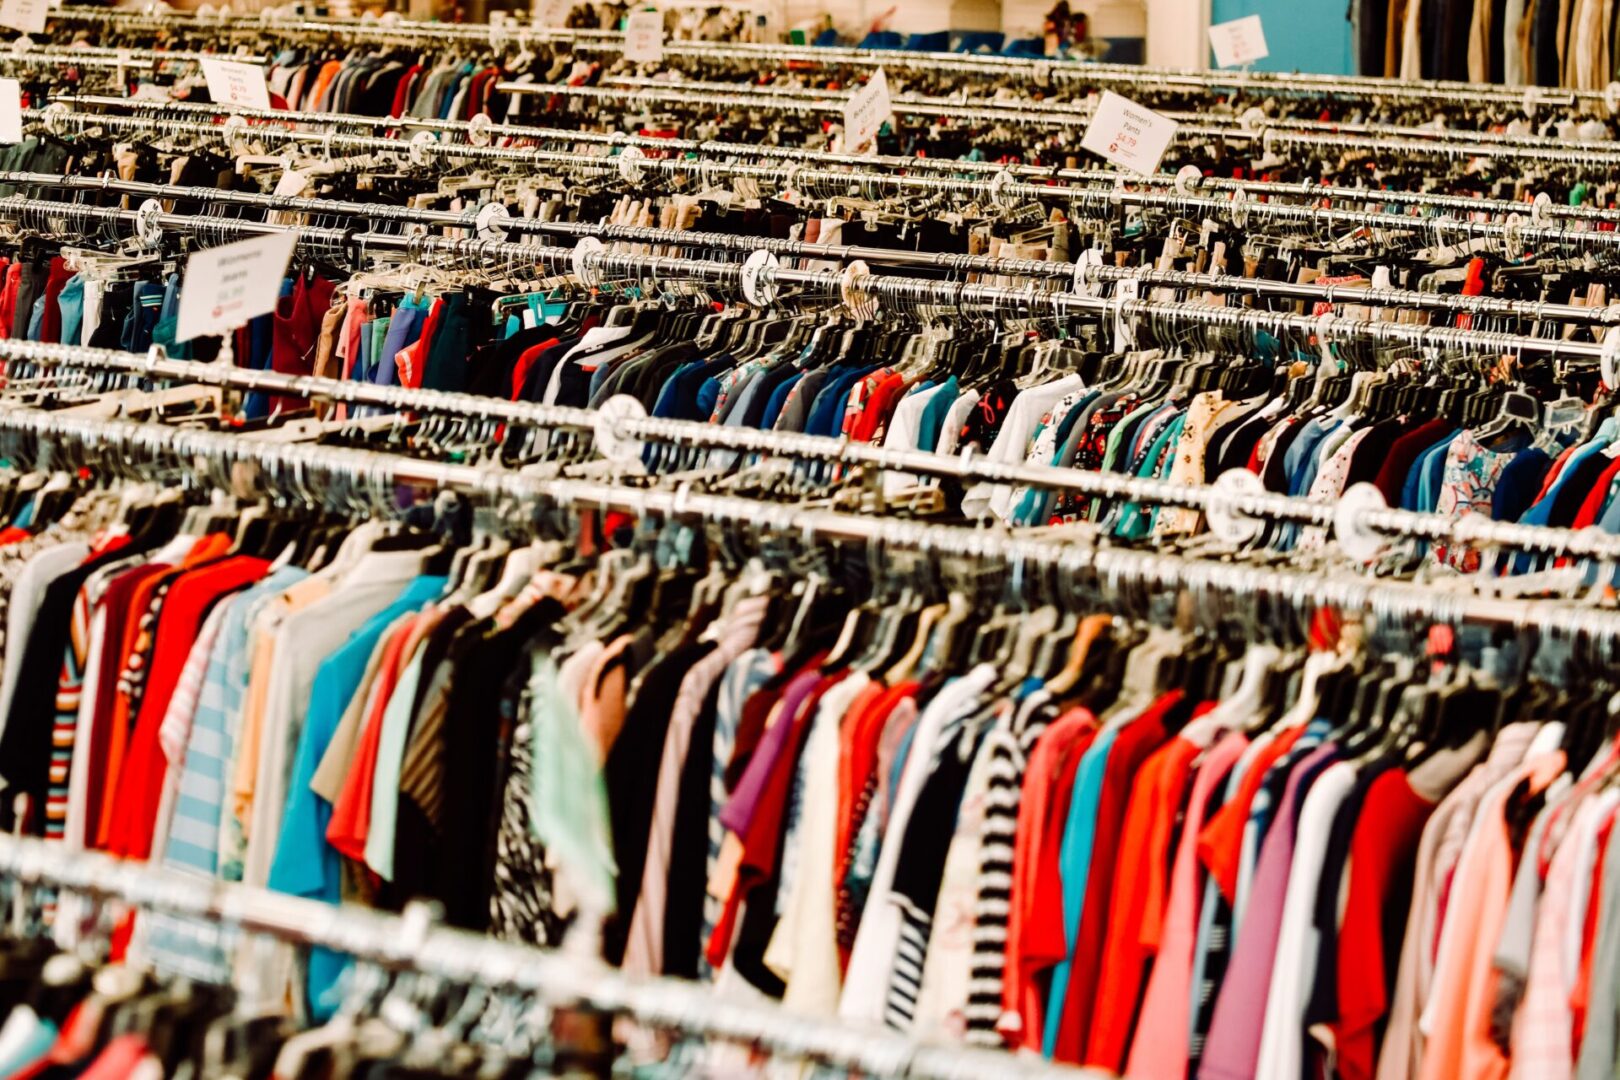 A large amount of clothes are on the racks.